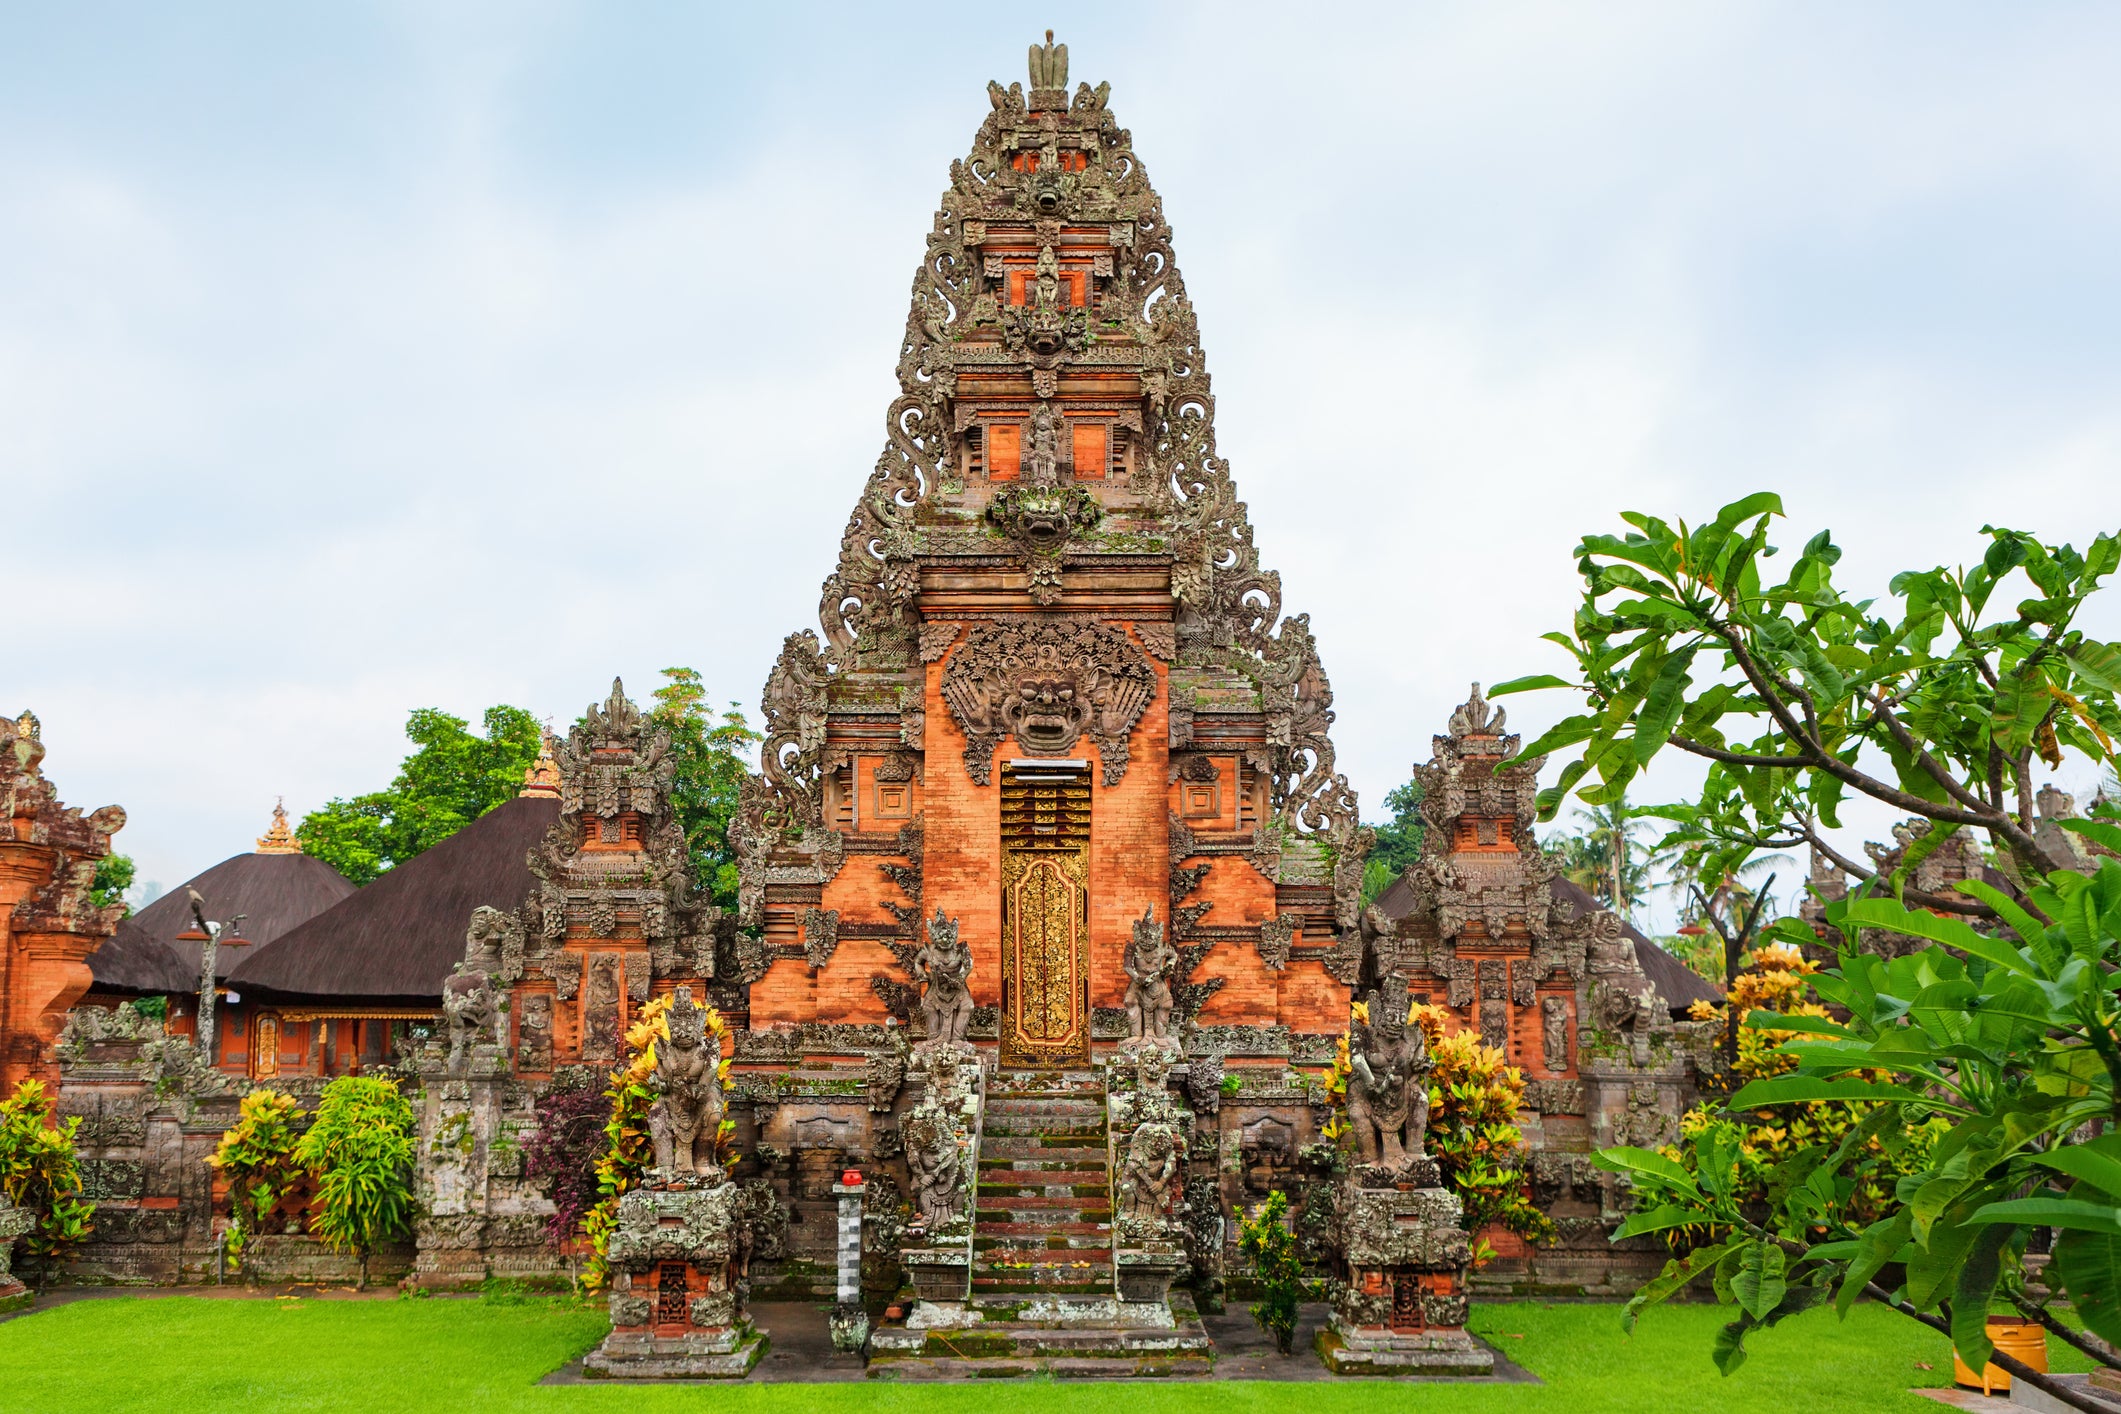 There’s no shortage of impressive temples on Bali